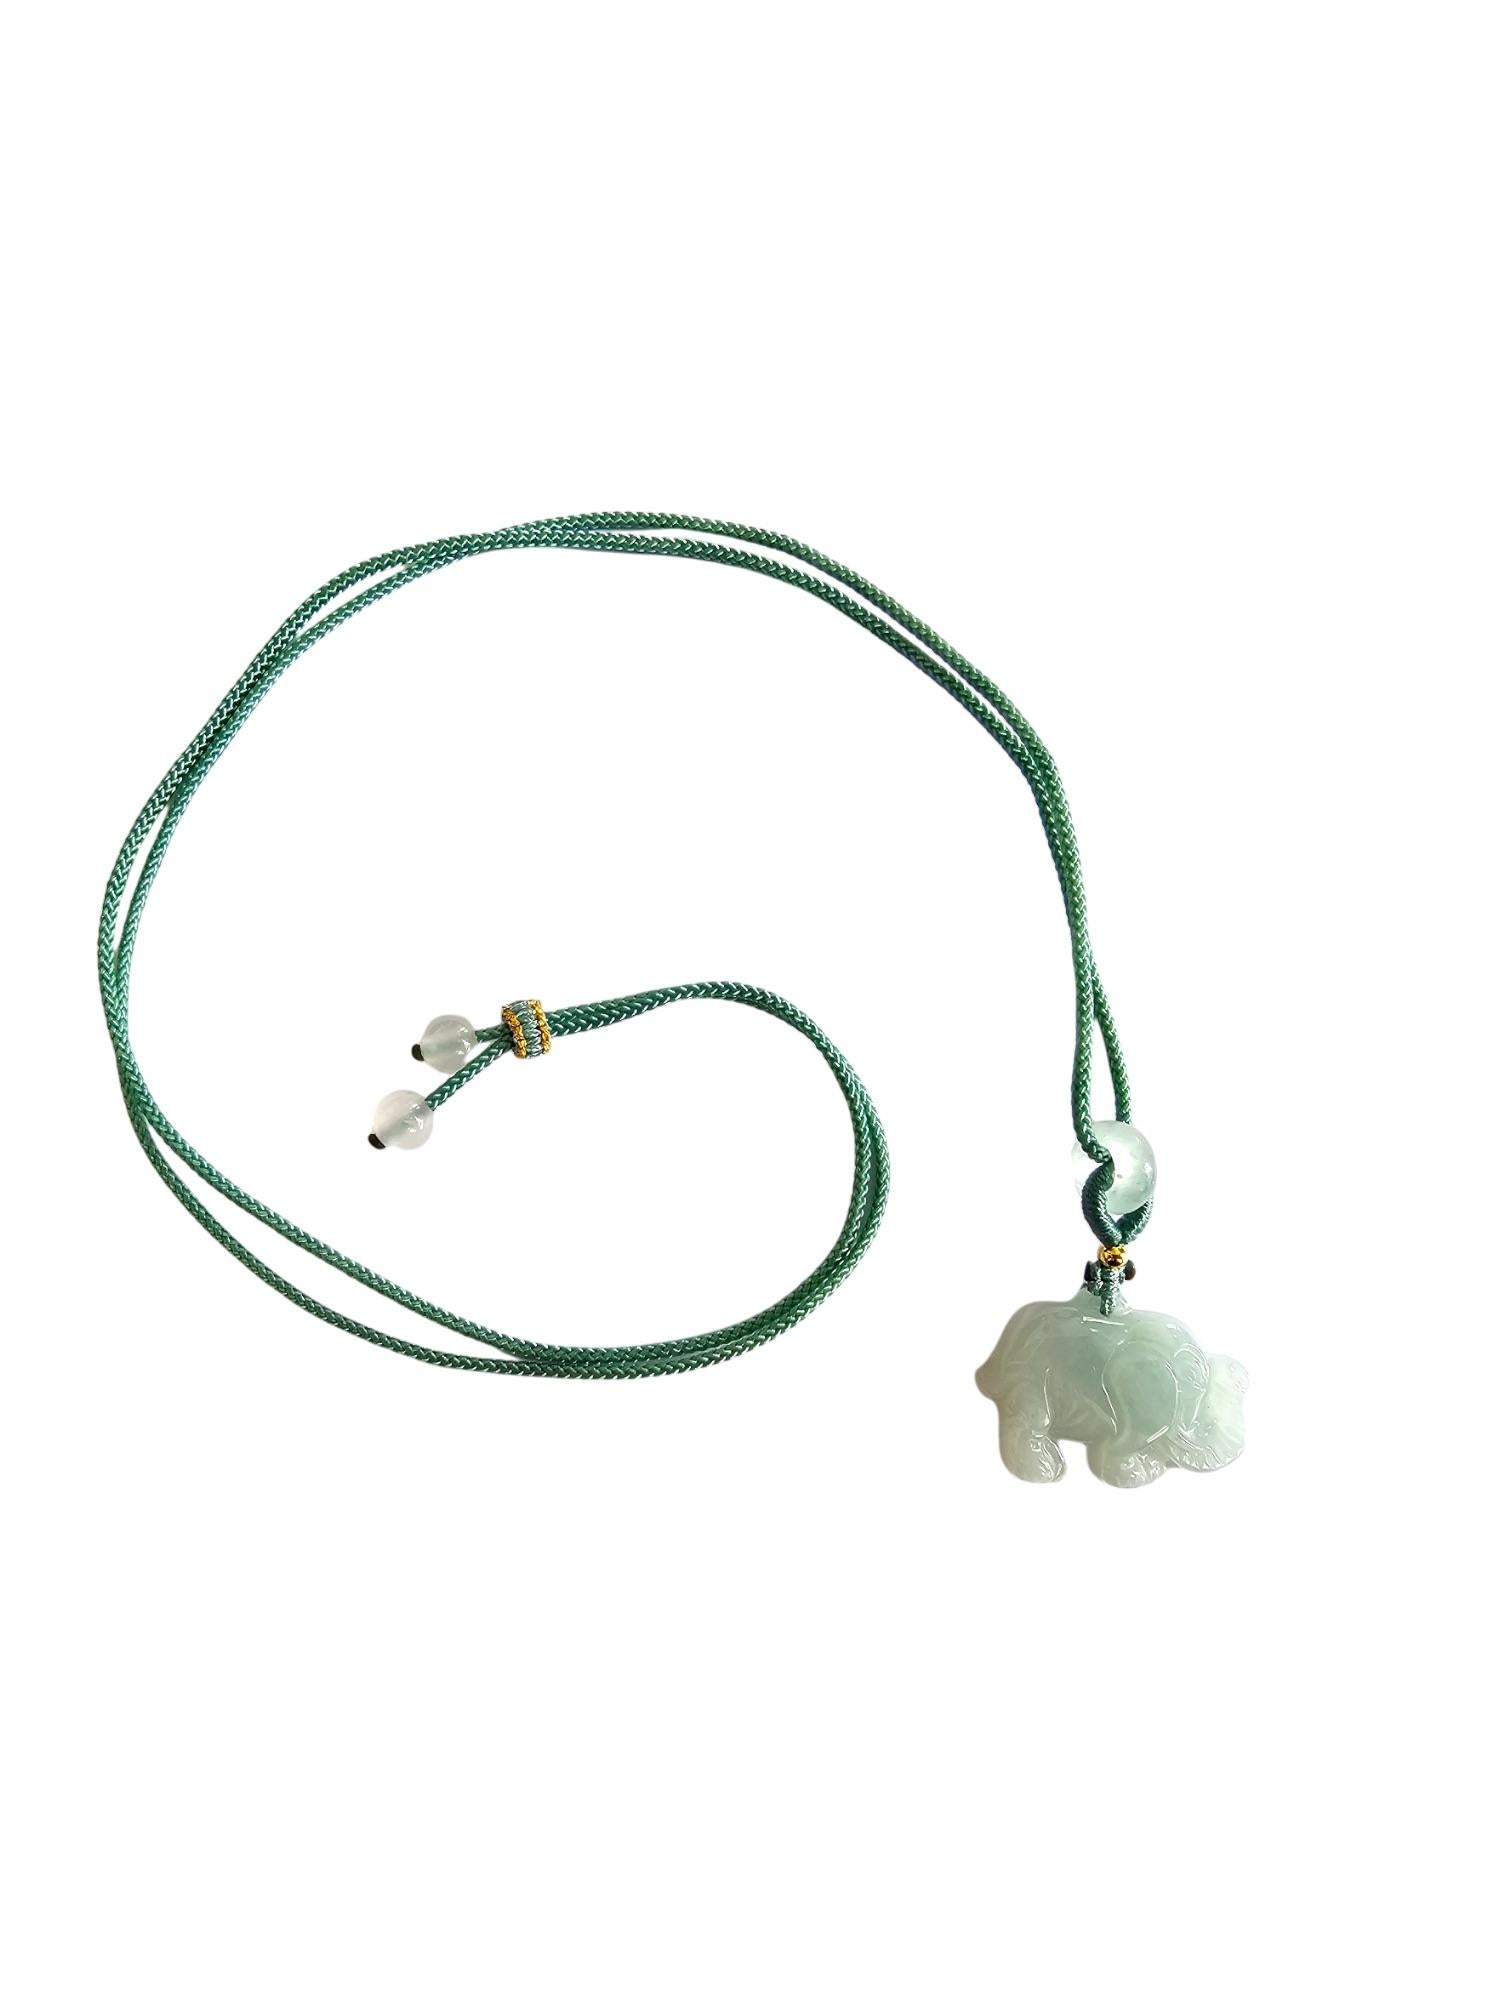 Sapporo Burmese A-Jadeite Elephant Pendant Necklace with FYORO String For Sale 6